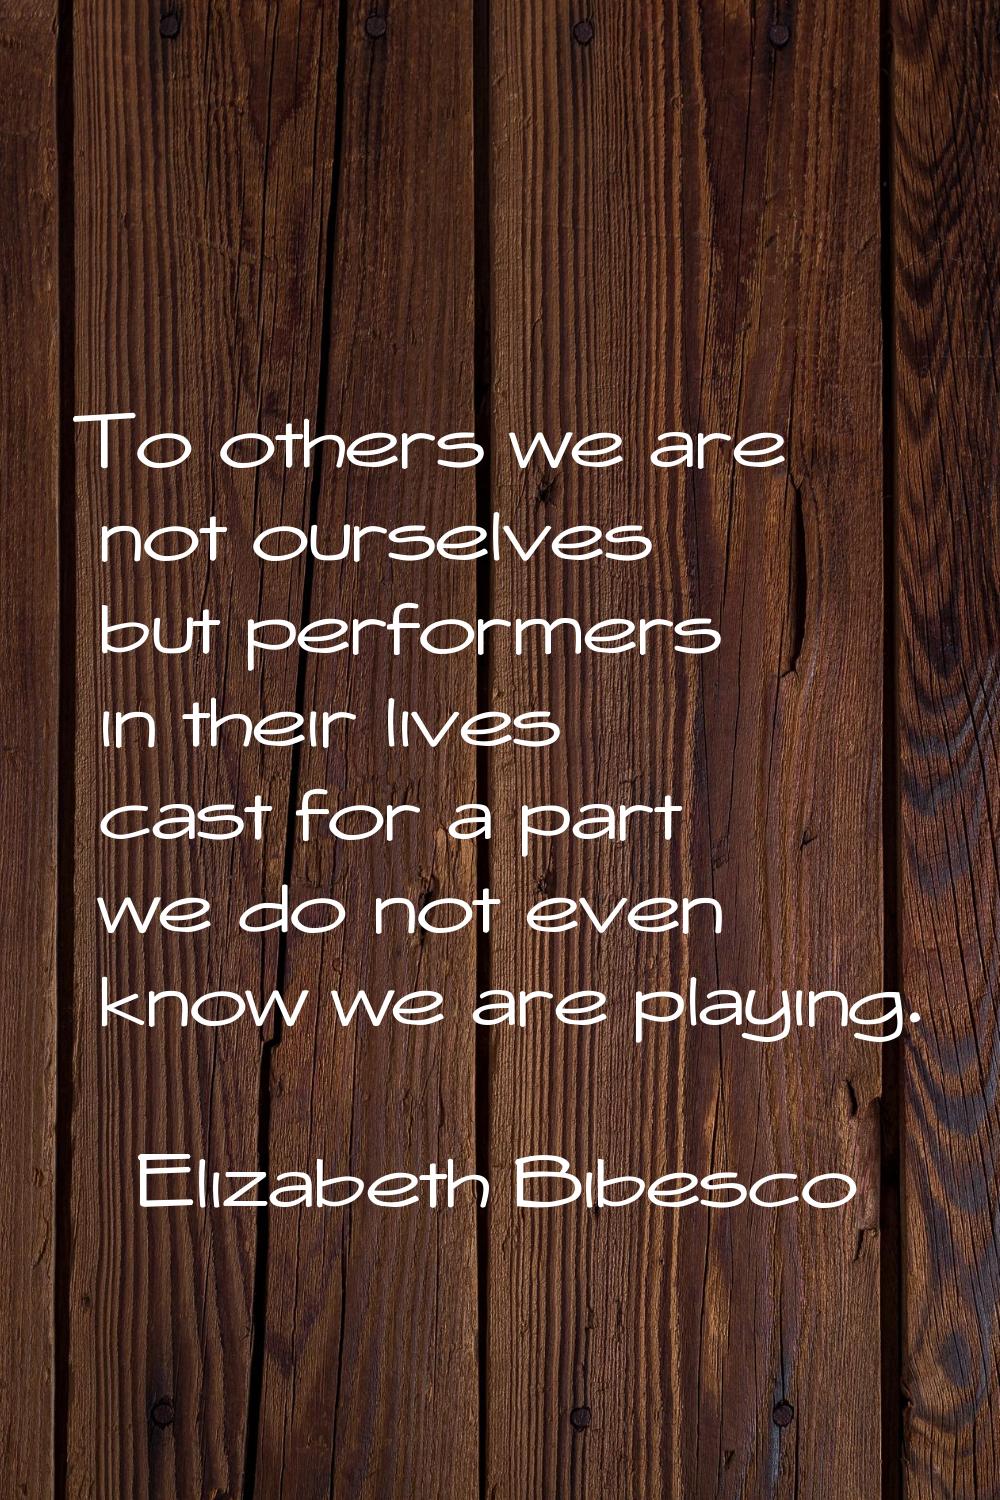 To others we are not ourselves but performers in their lives cast for a part we do not even know we